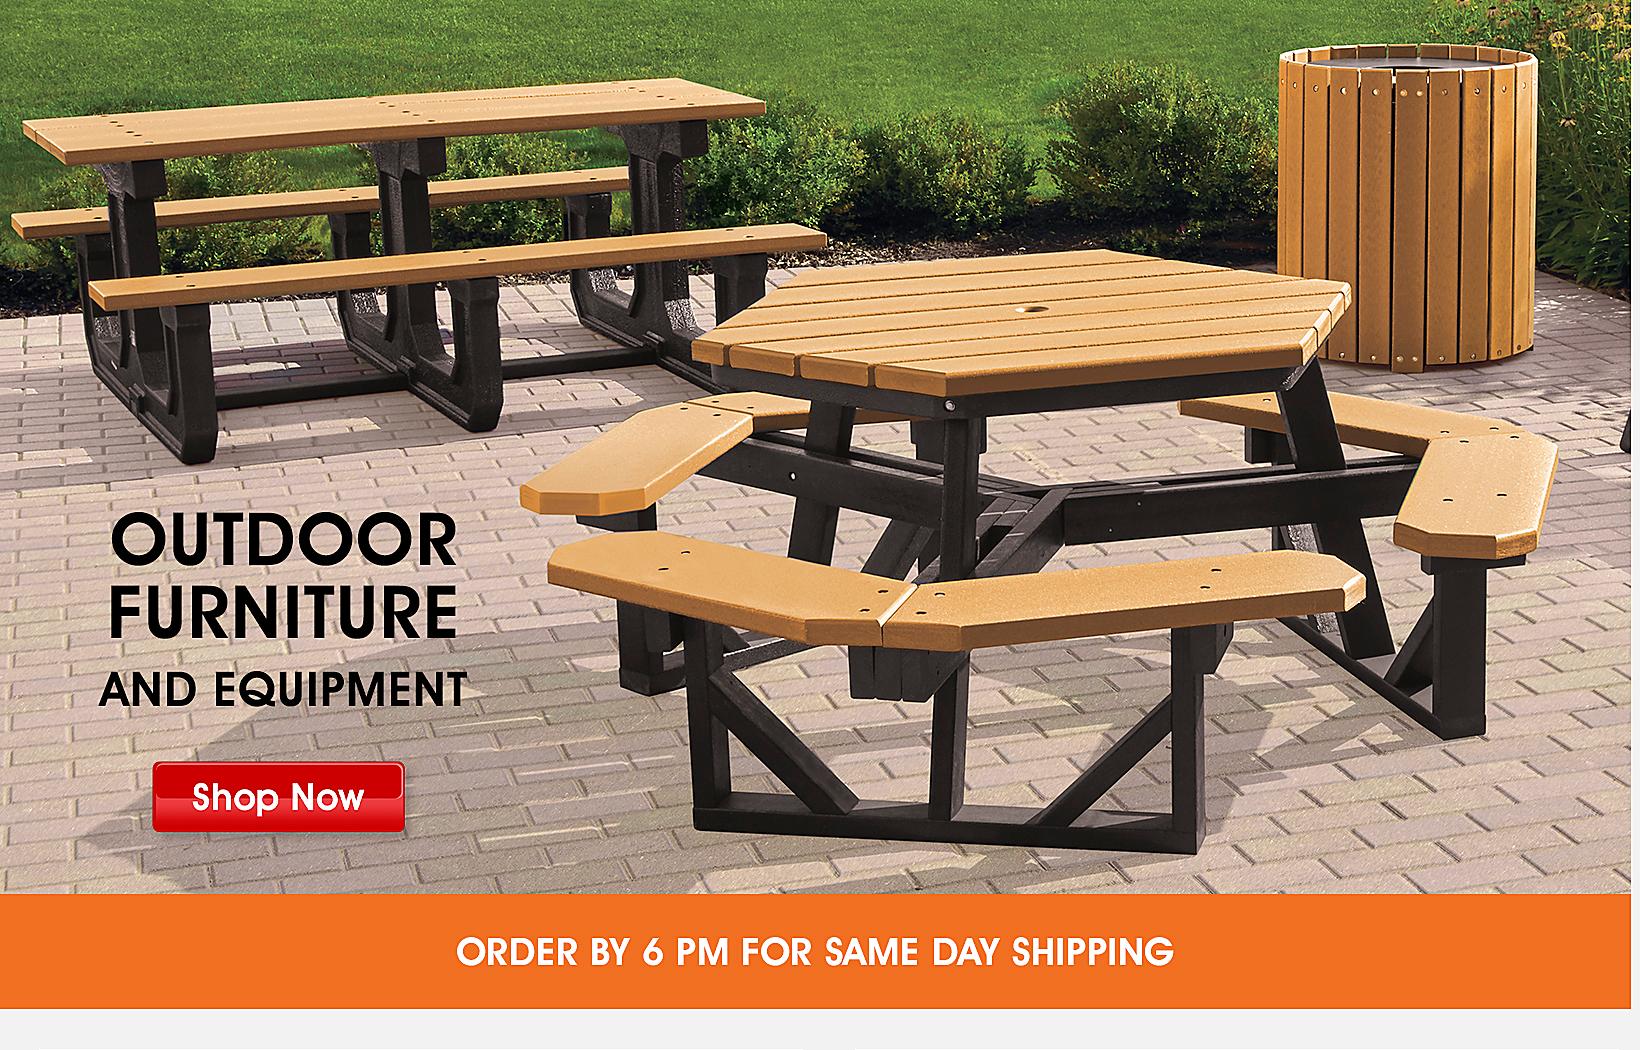 Outdoor Furniture and Equipment - Shop Now – ORDER BY 6 PM FOR SAME DAY SHIPPING